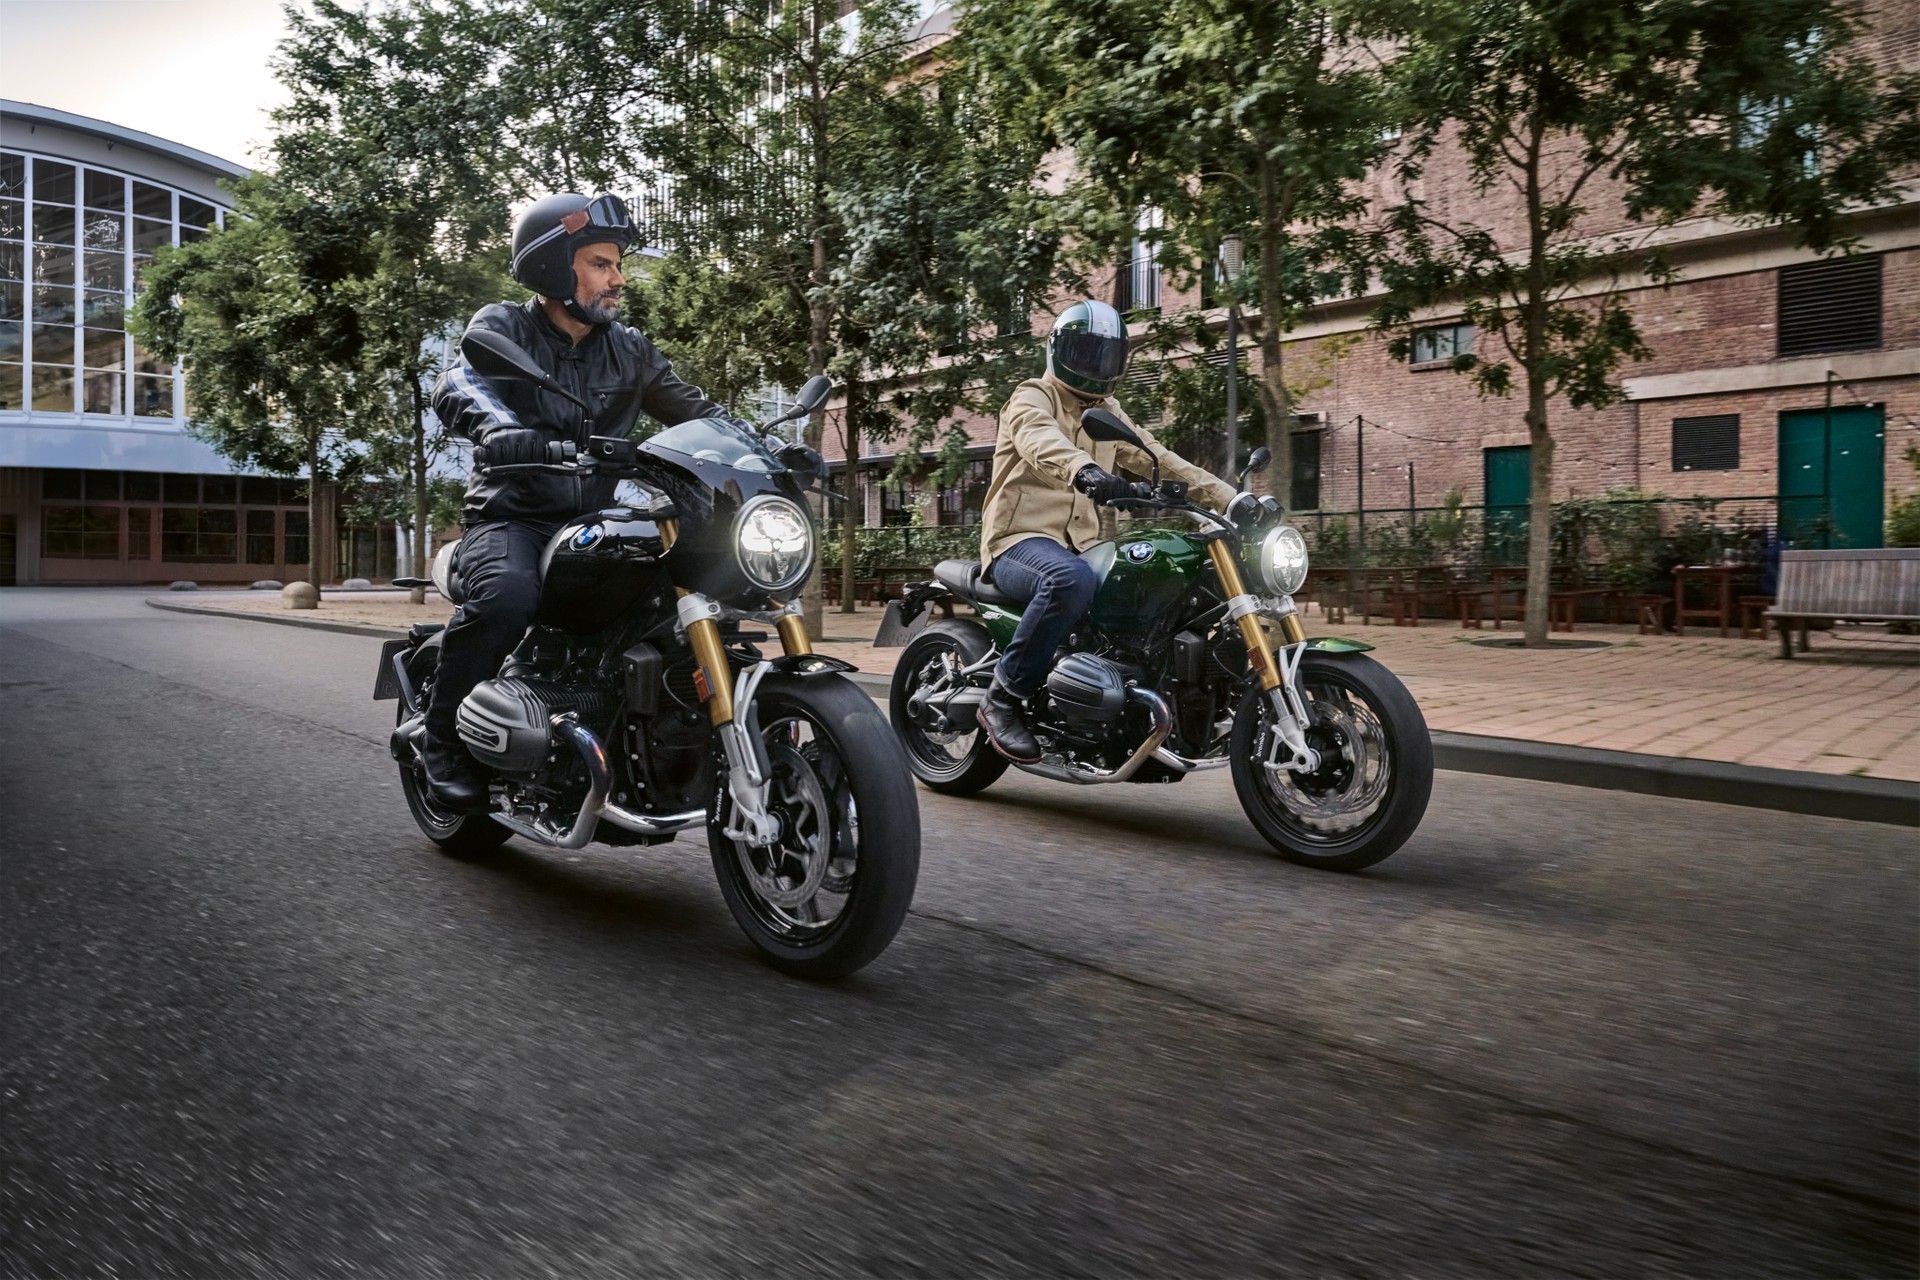 BMW presents the new R 12 nineT and R 12

